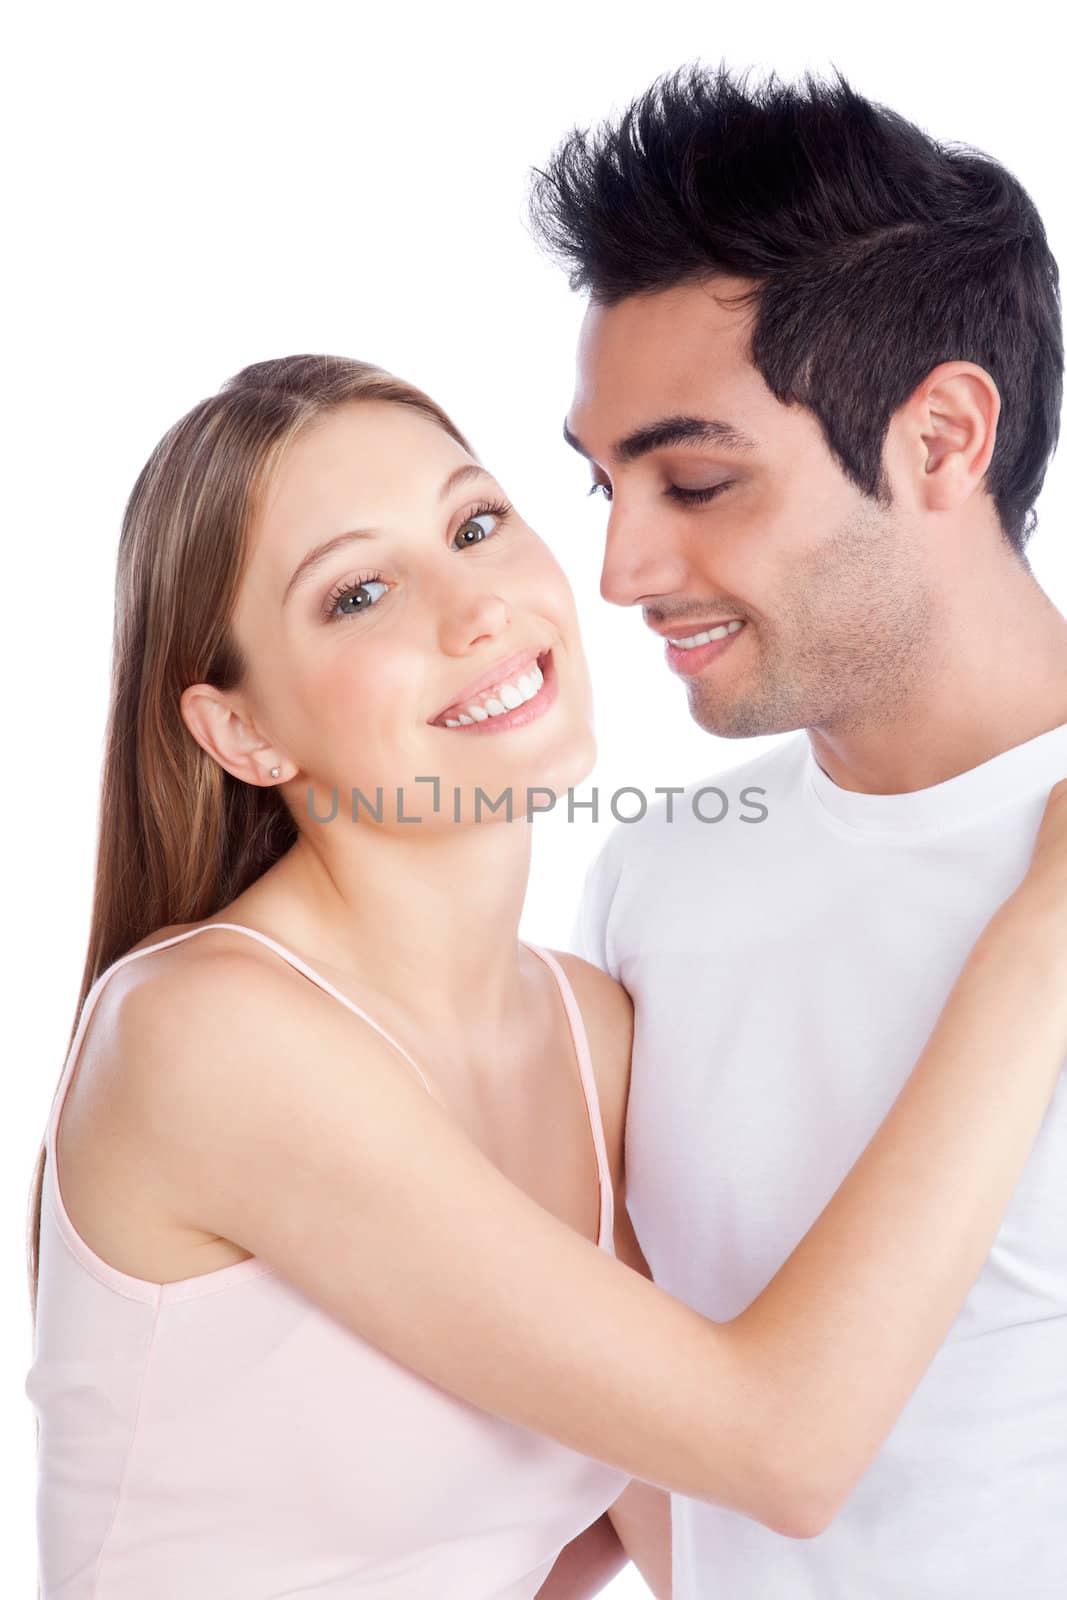 Portrait of diverse young couple isolated on white background.